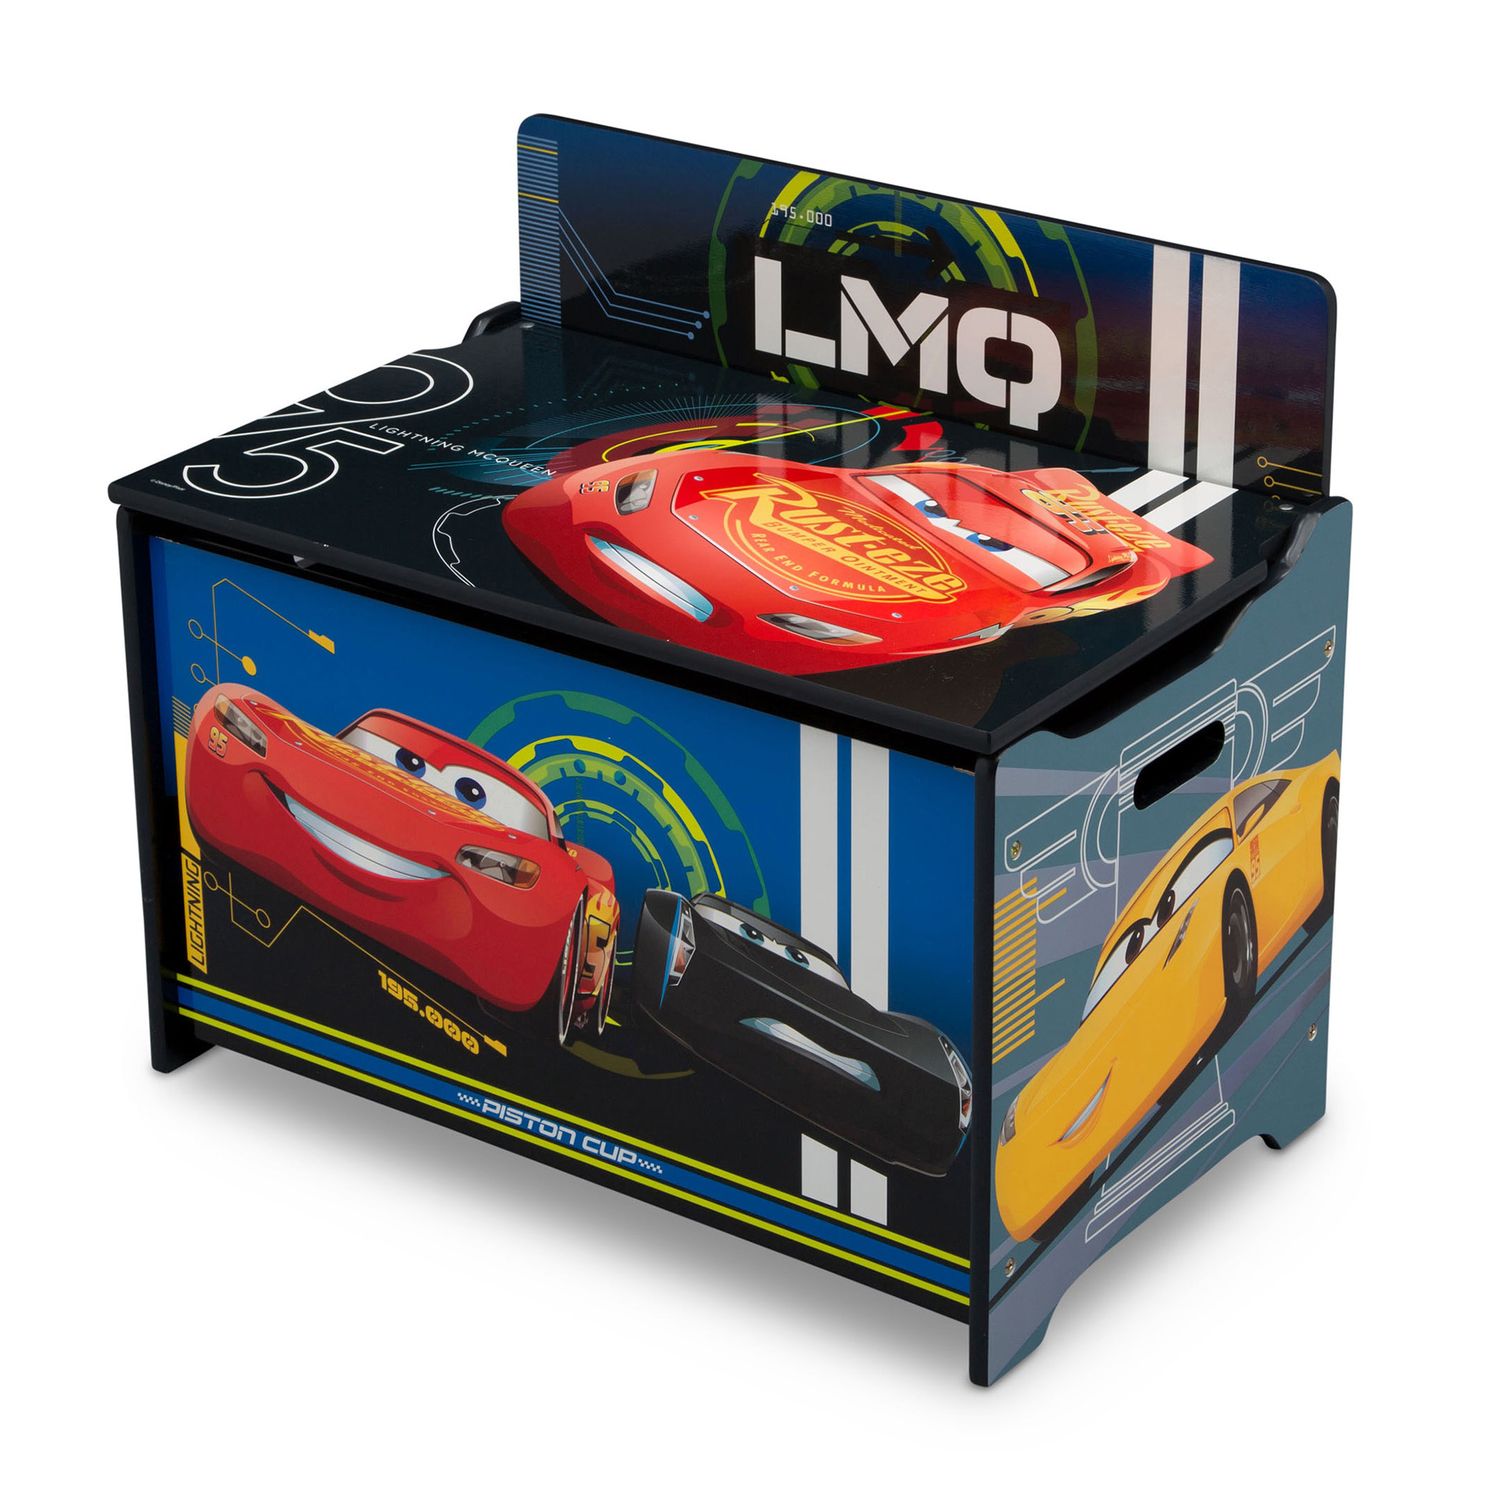 Image for Disney / Pixar Cars Deluxe Toy Box by Delta Children at Kohl's.